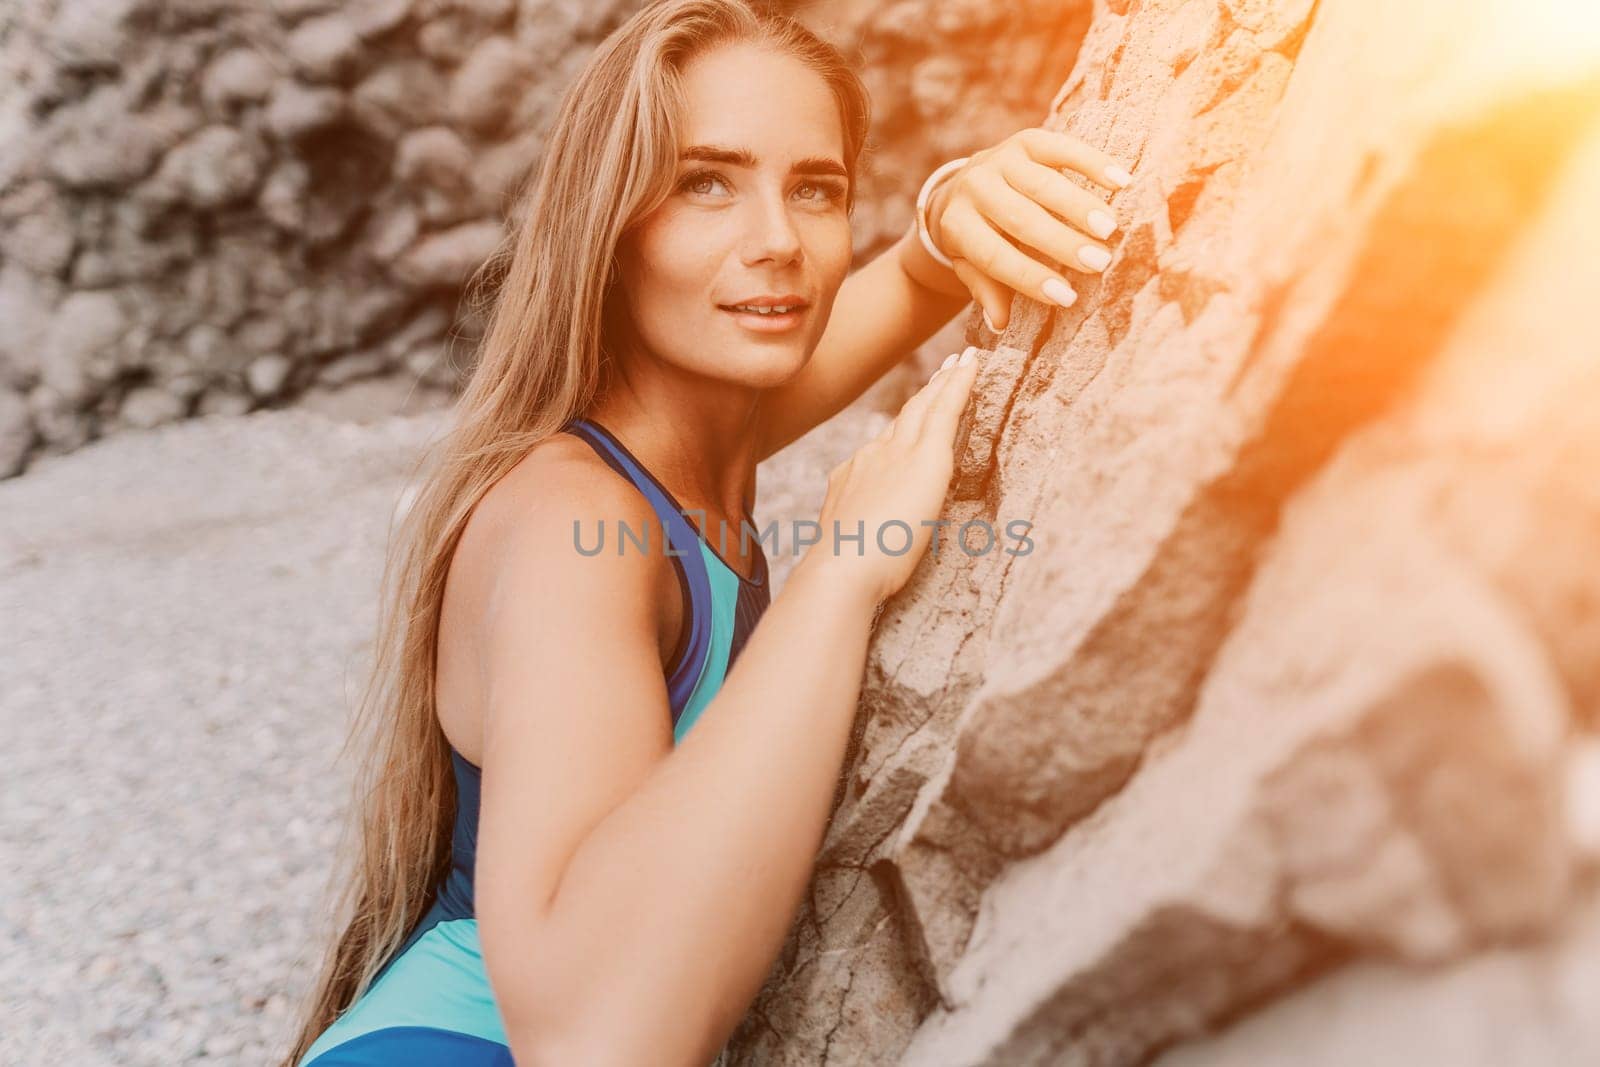 Woman summer travel sea. Happy tourist in blue bikini enjoy taking picture outdoors for memories. Woman traveler posing on the beach surrounded by volcanic mountains, sharing travel adventure journey by panophotograph